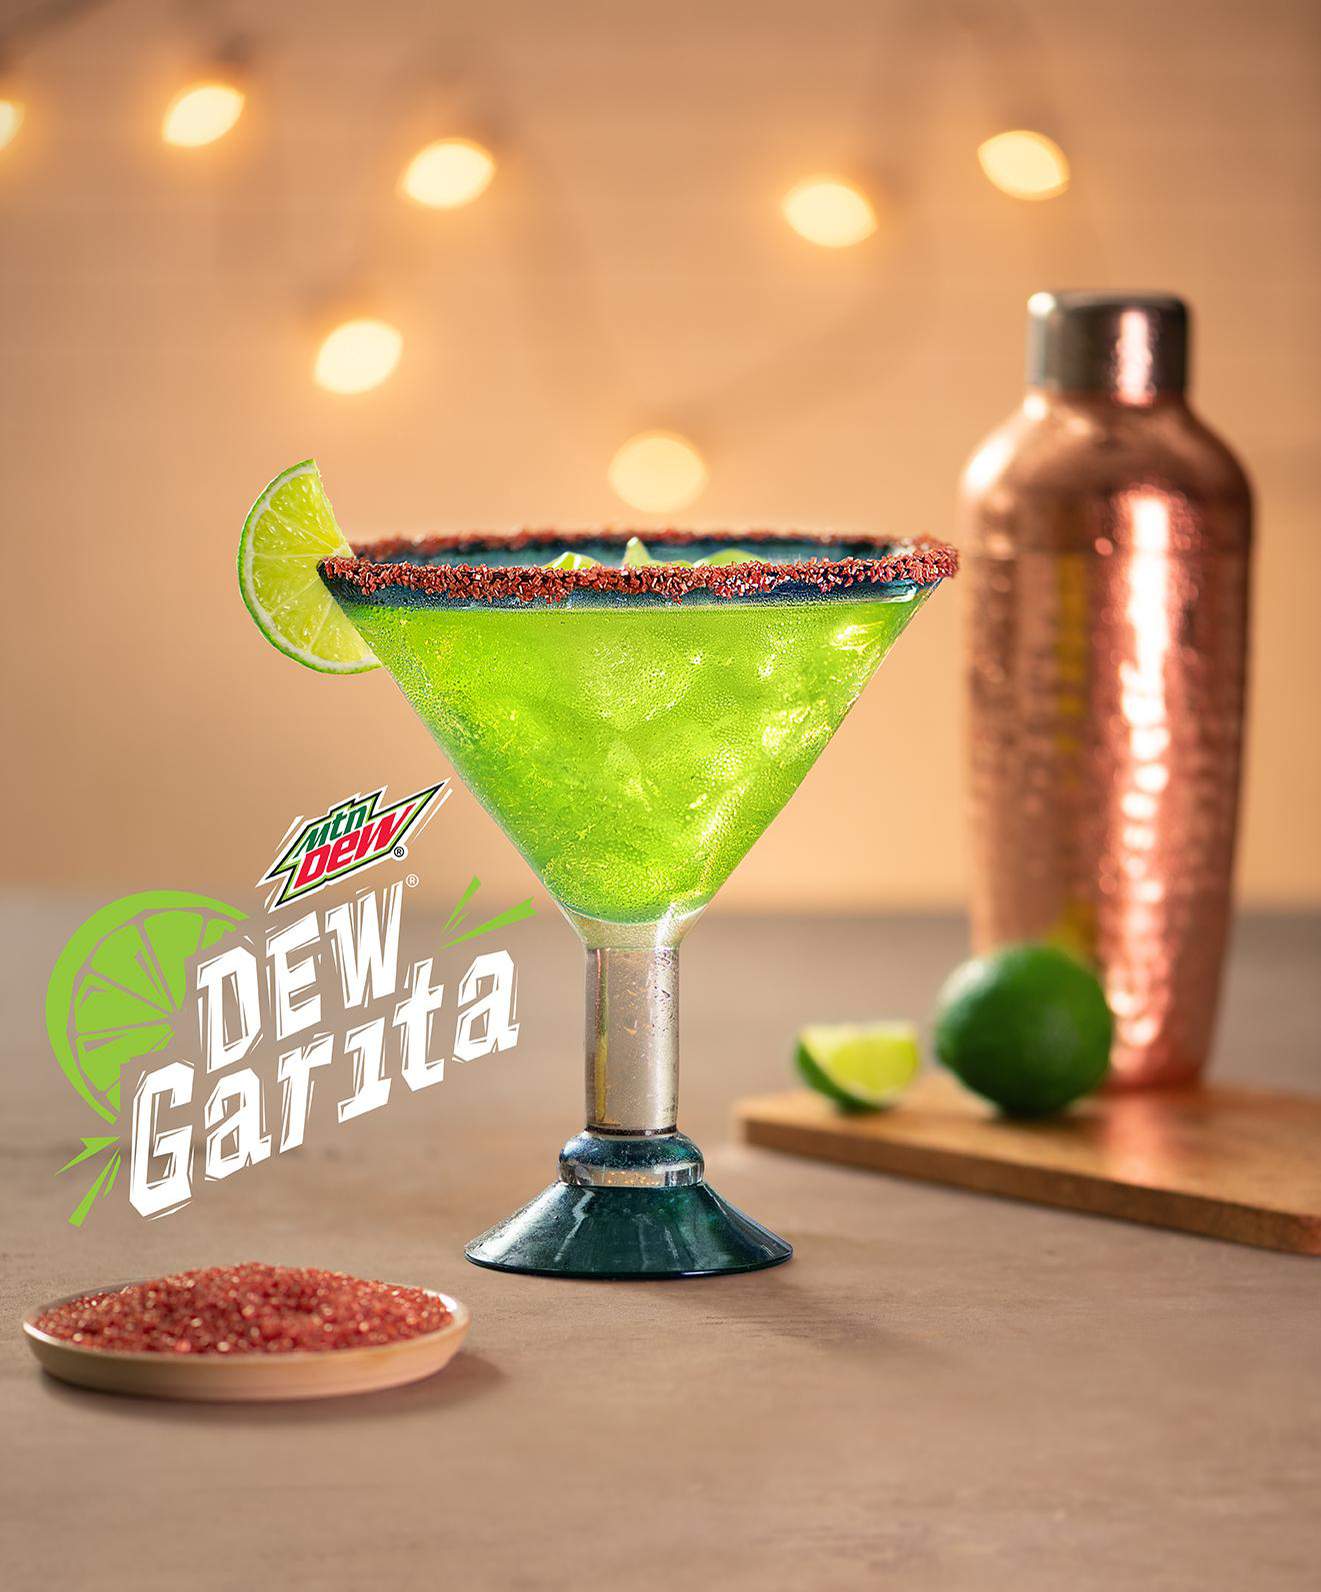 Mountain Dew, Red Lobster announce Mountain Dew-garita... who asked for this?